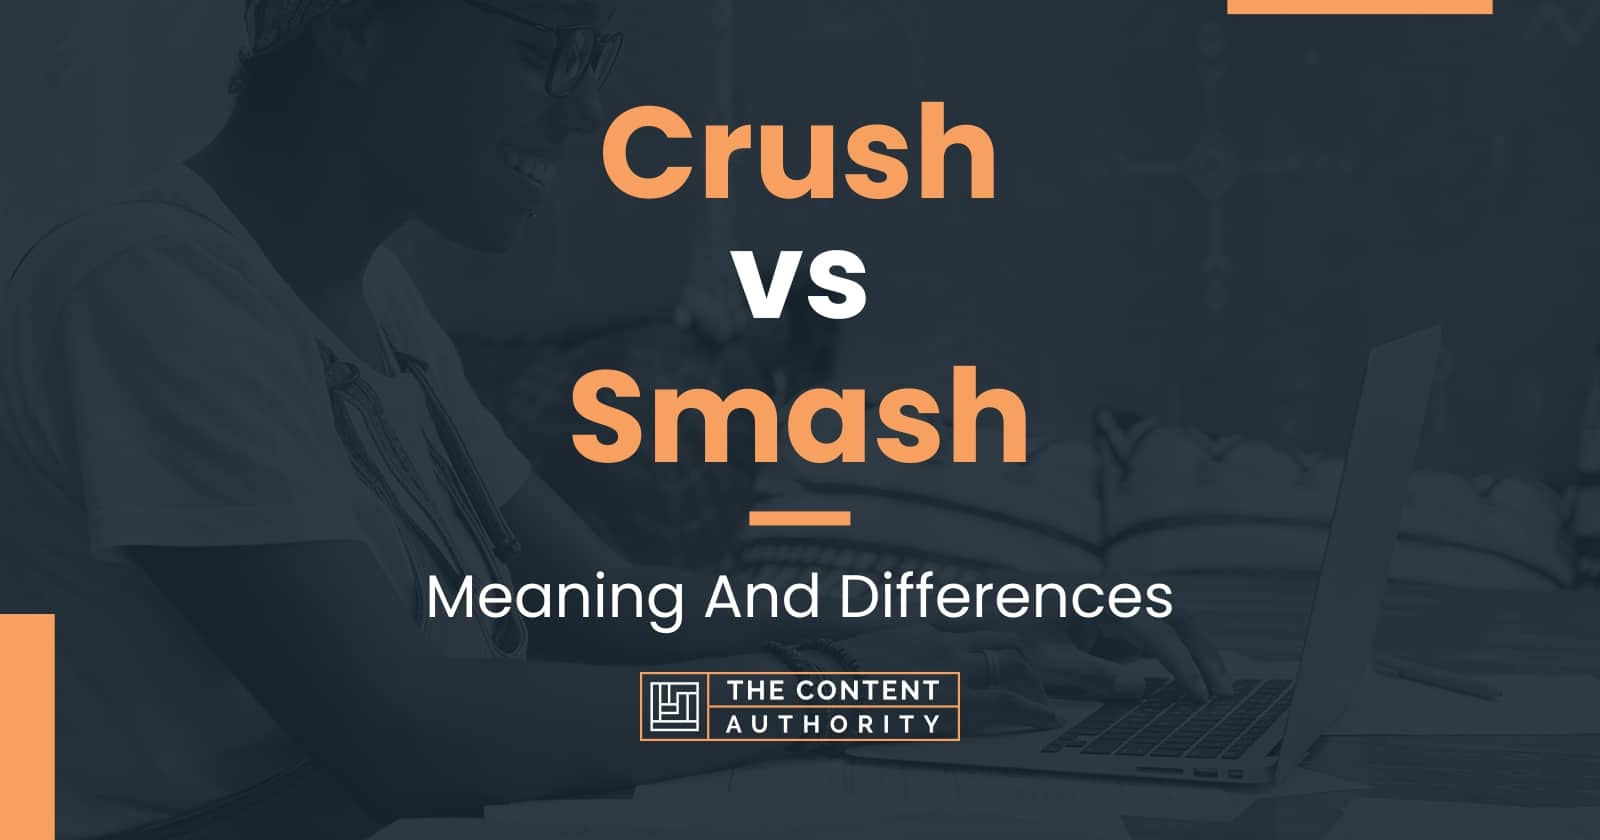 Crush vs Smash: Meaning And Differences